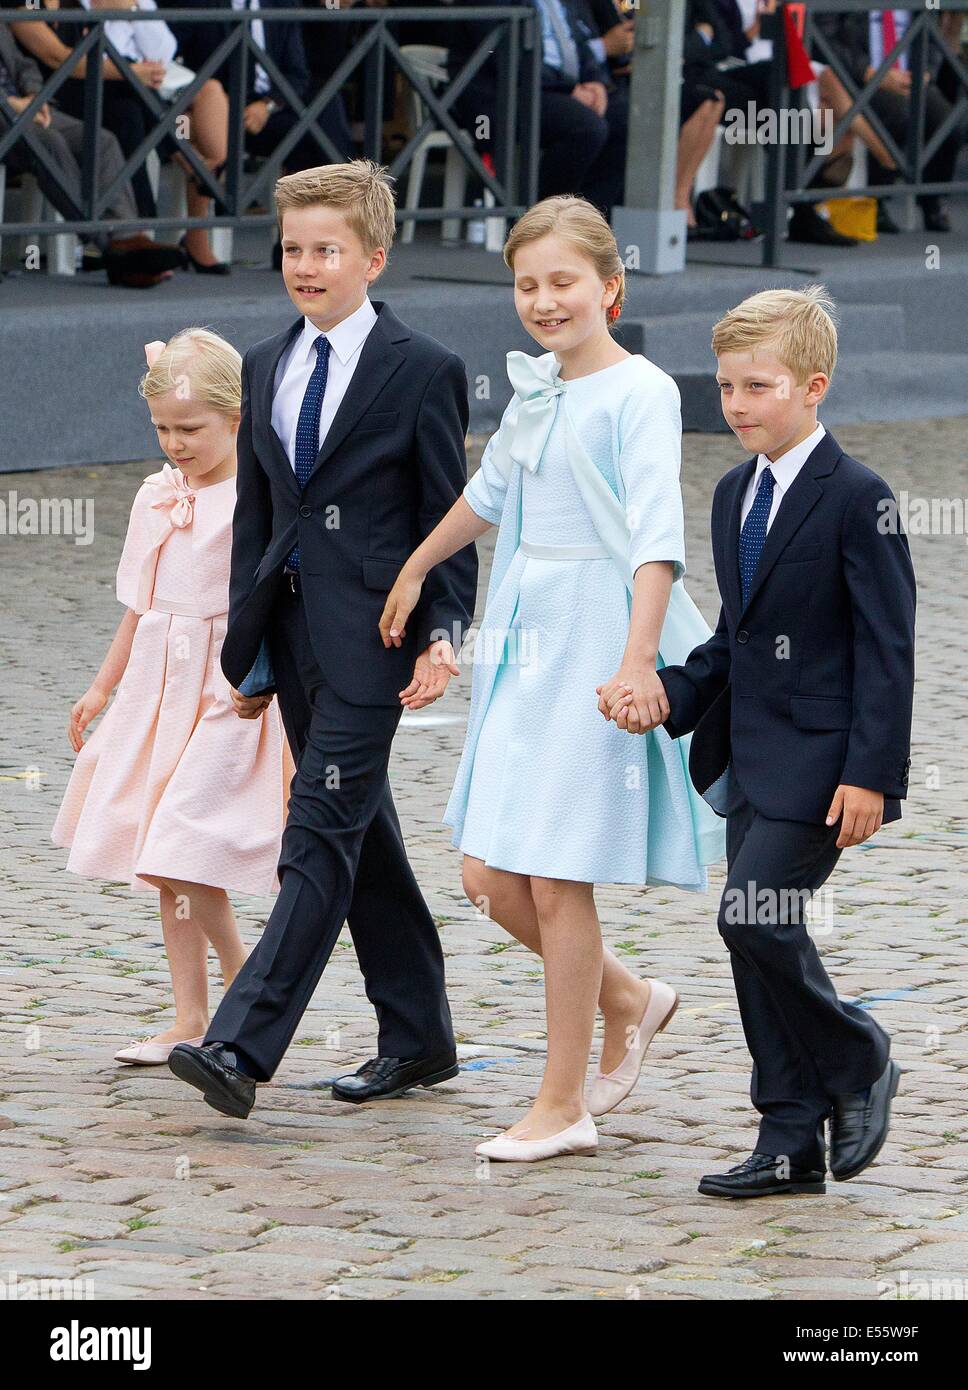 (L-R) Princess Eleonore, Prince Gabriel, Crown Princess Elisabeth and Prince Emmanuel of Belgium during the National Day celebrations in Brussels (Belgium), 21 July 2014. Photo: RPE/Albert Nieboer// /dpa -NO WIRE SERVICE- Stock Photo